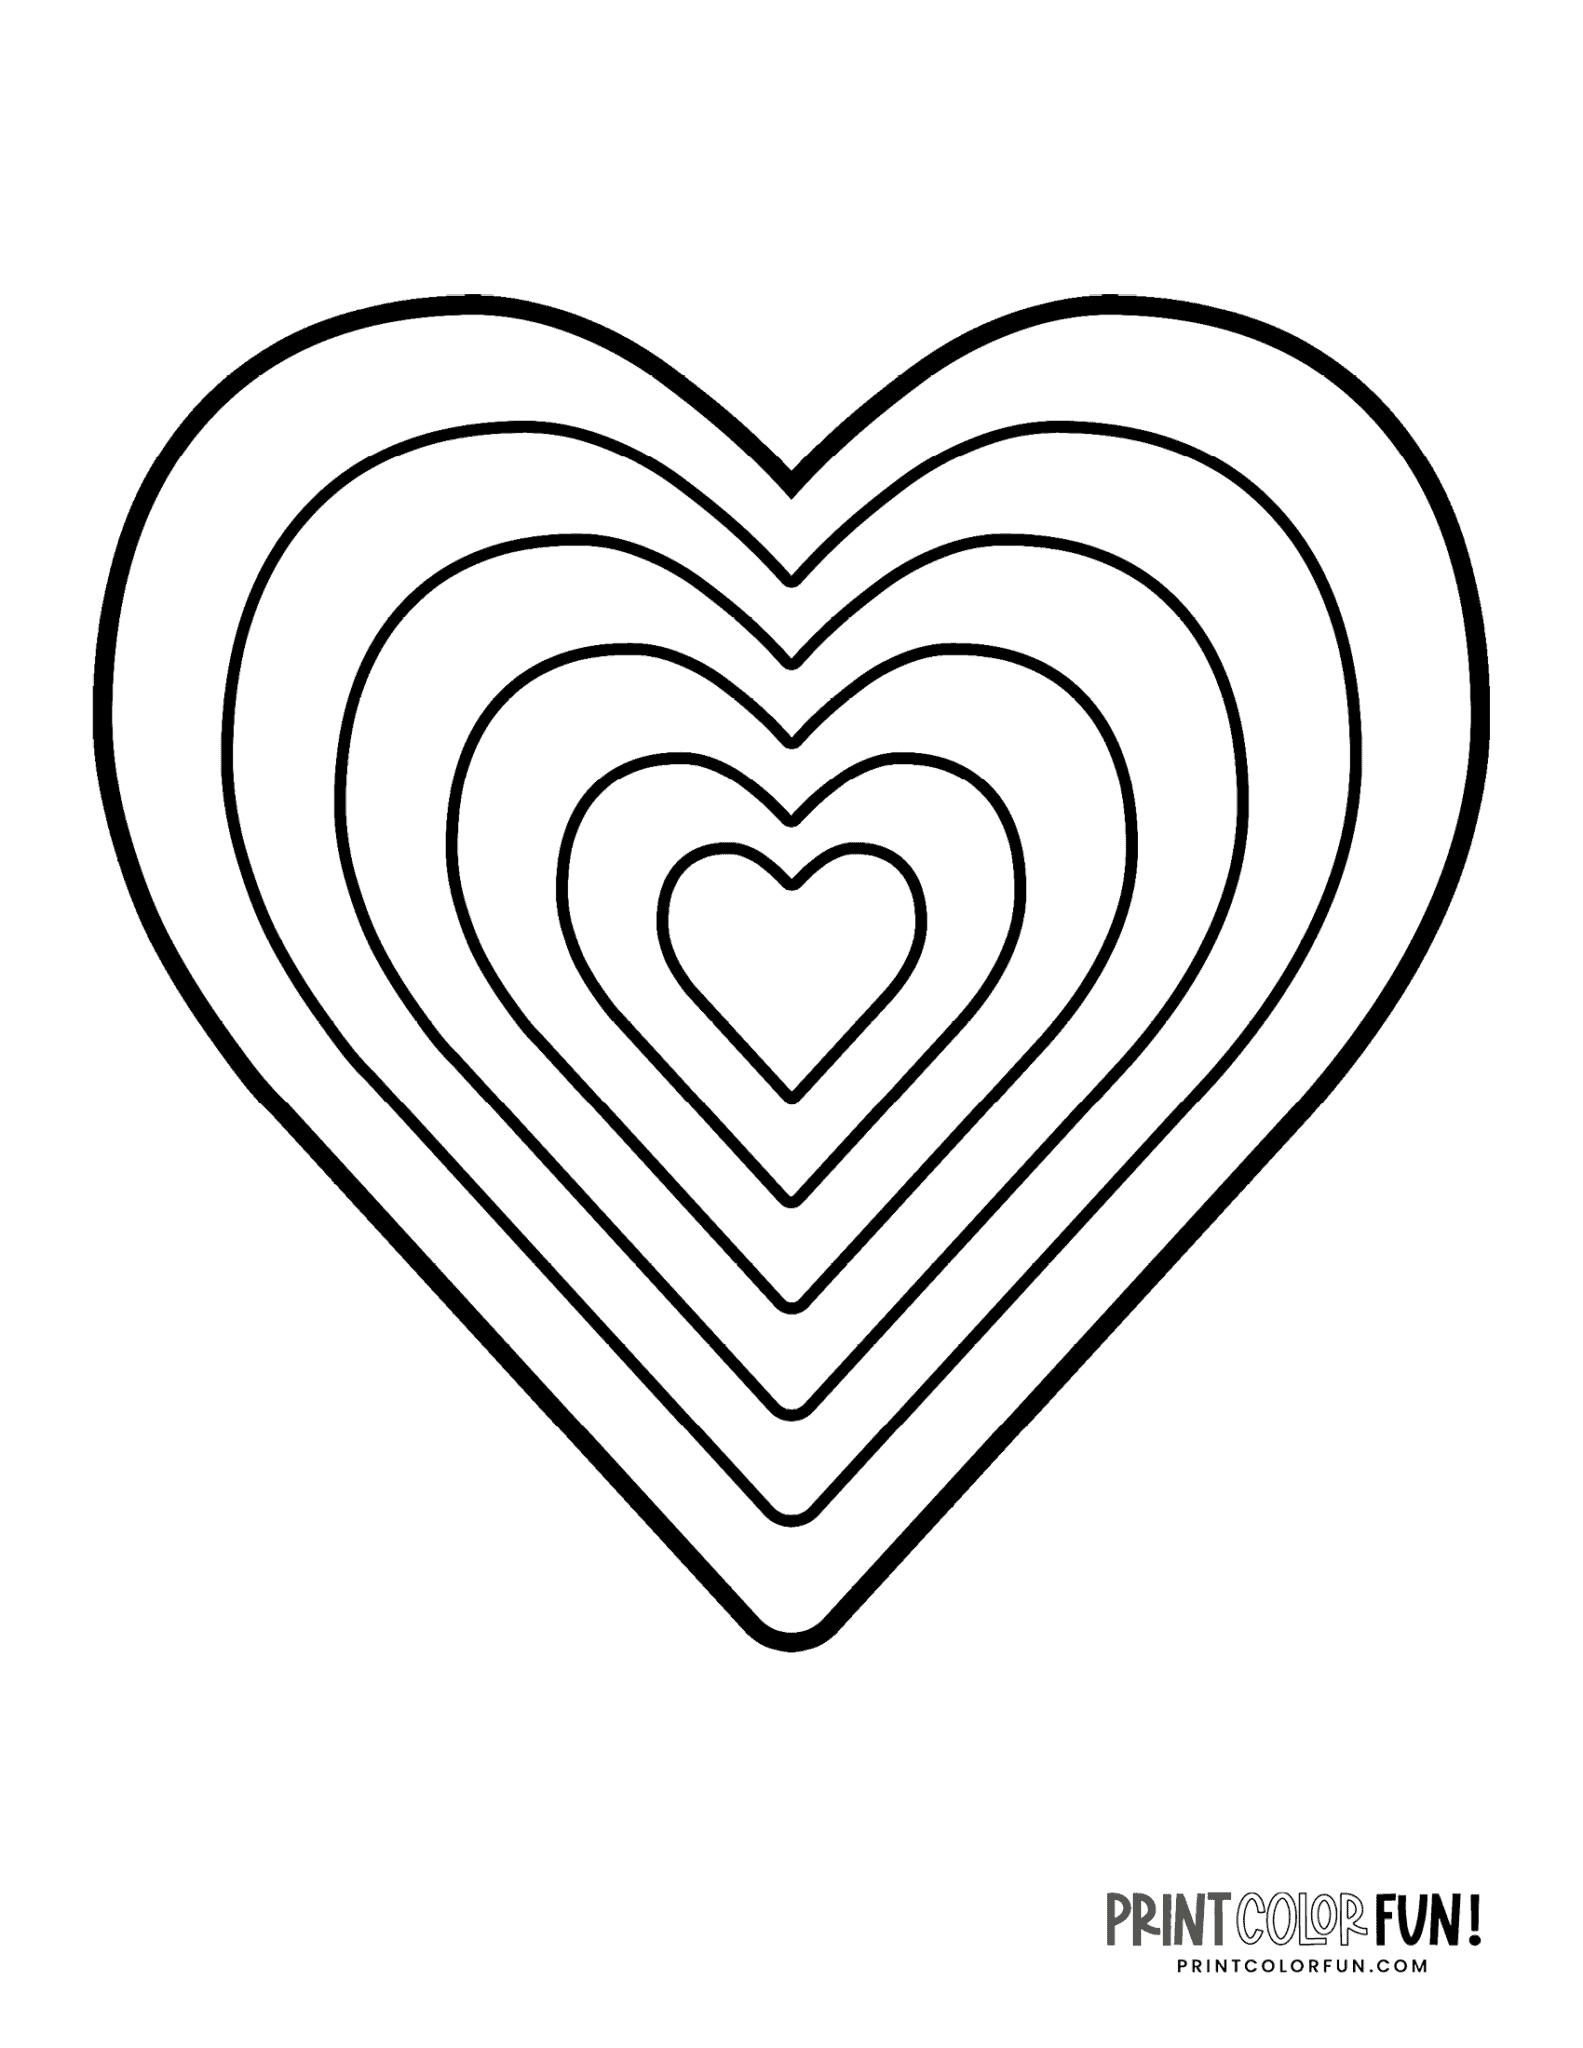 free-printable-heart-coloring-pages-for-kids-free-printable-heart-coloring-pages-for-kids